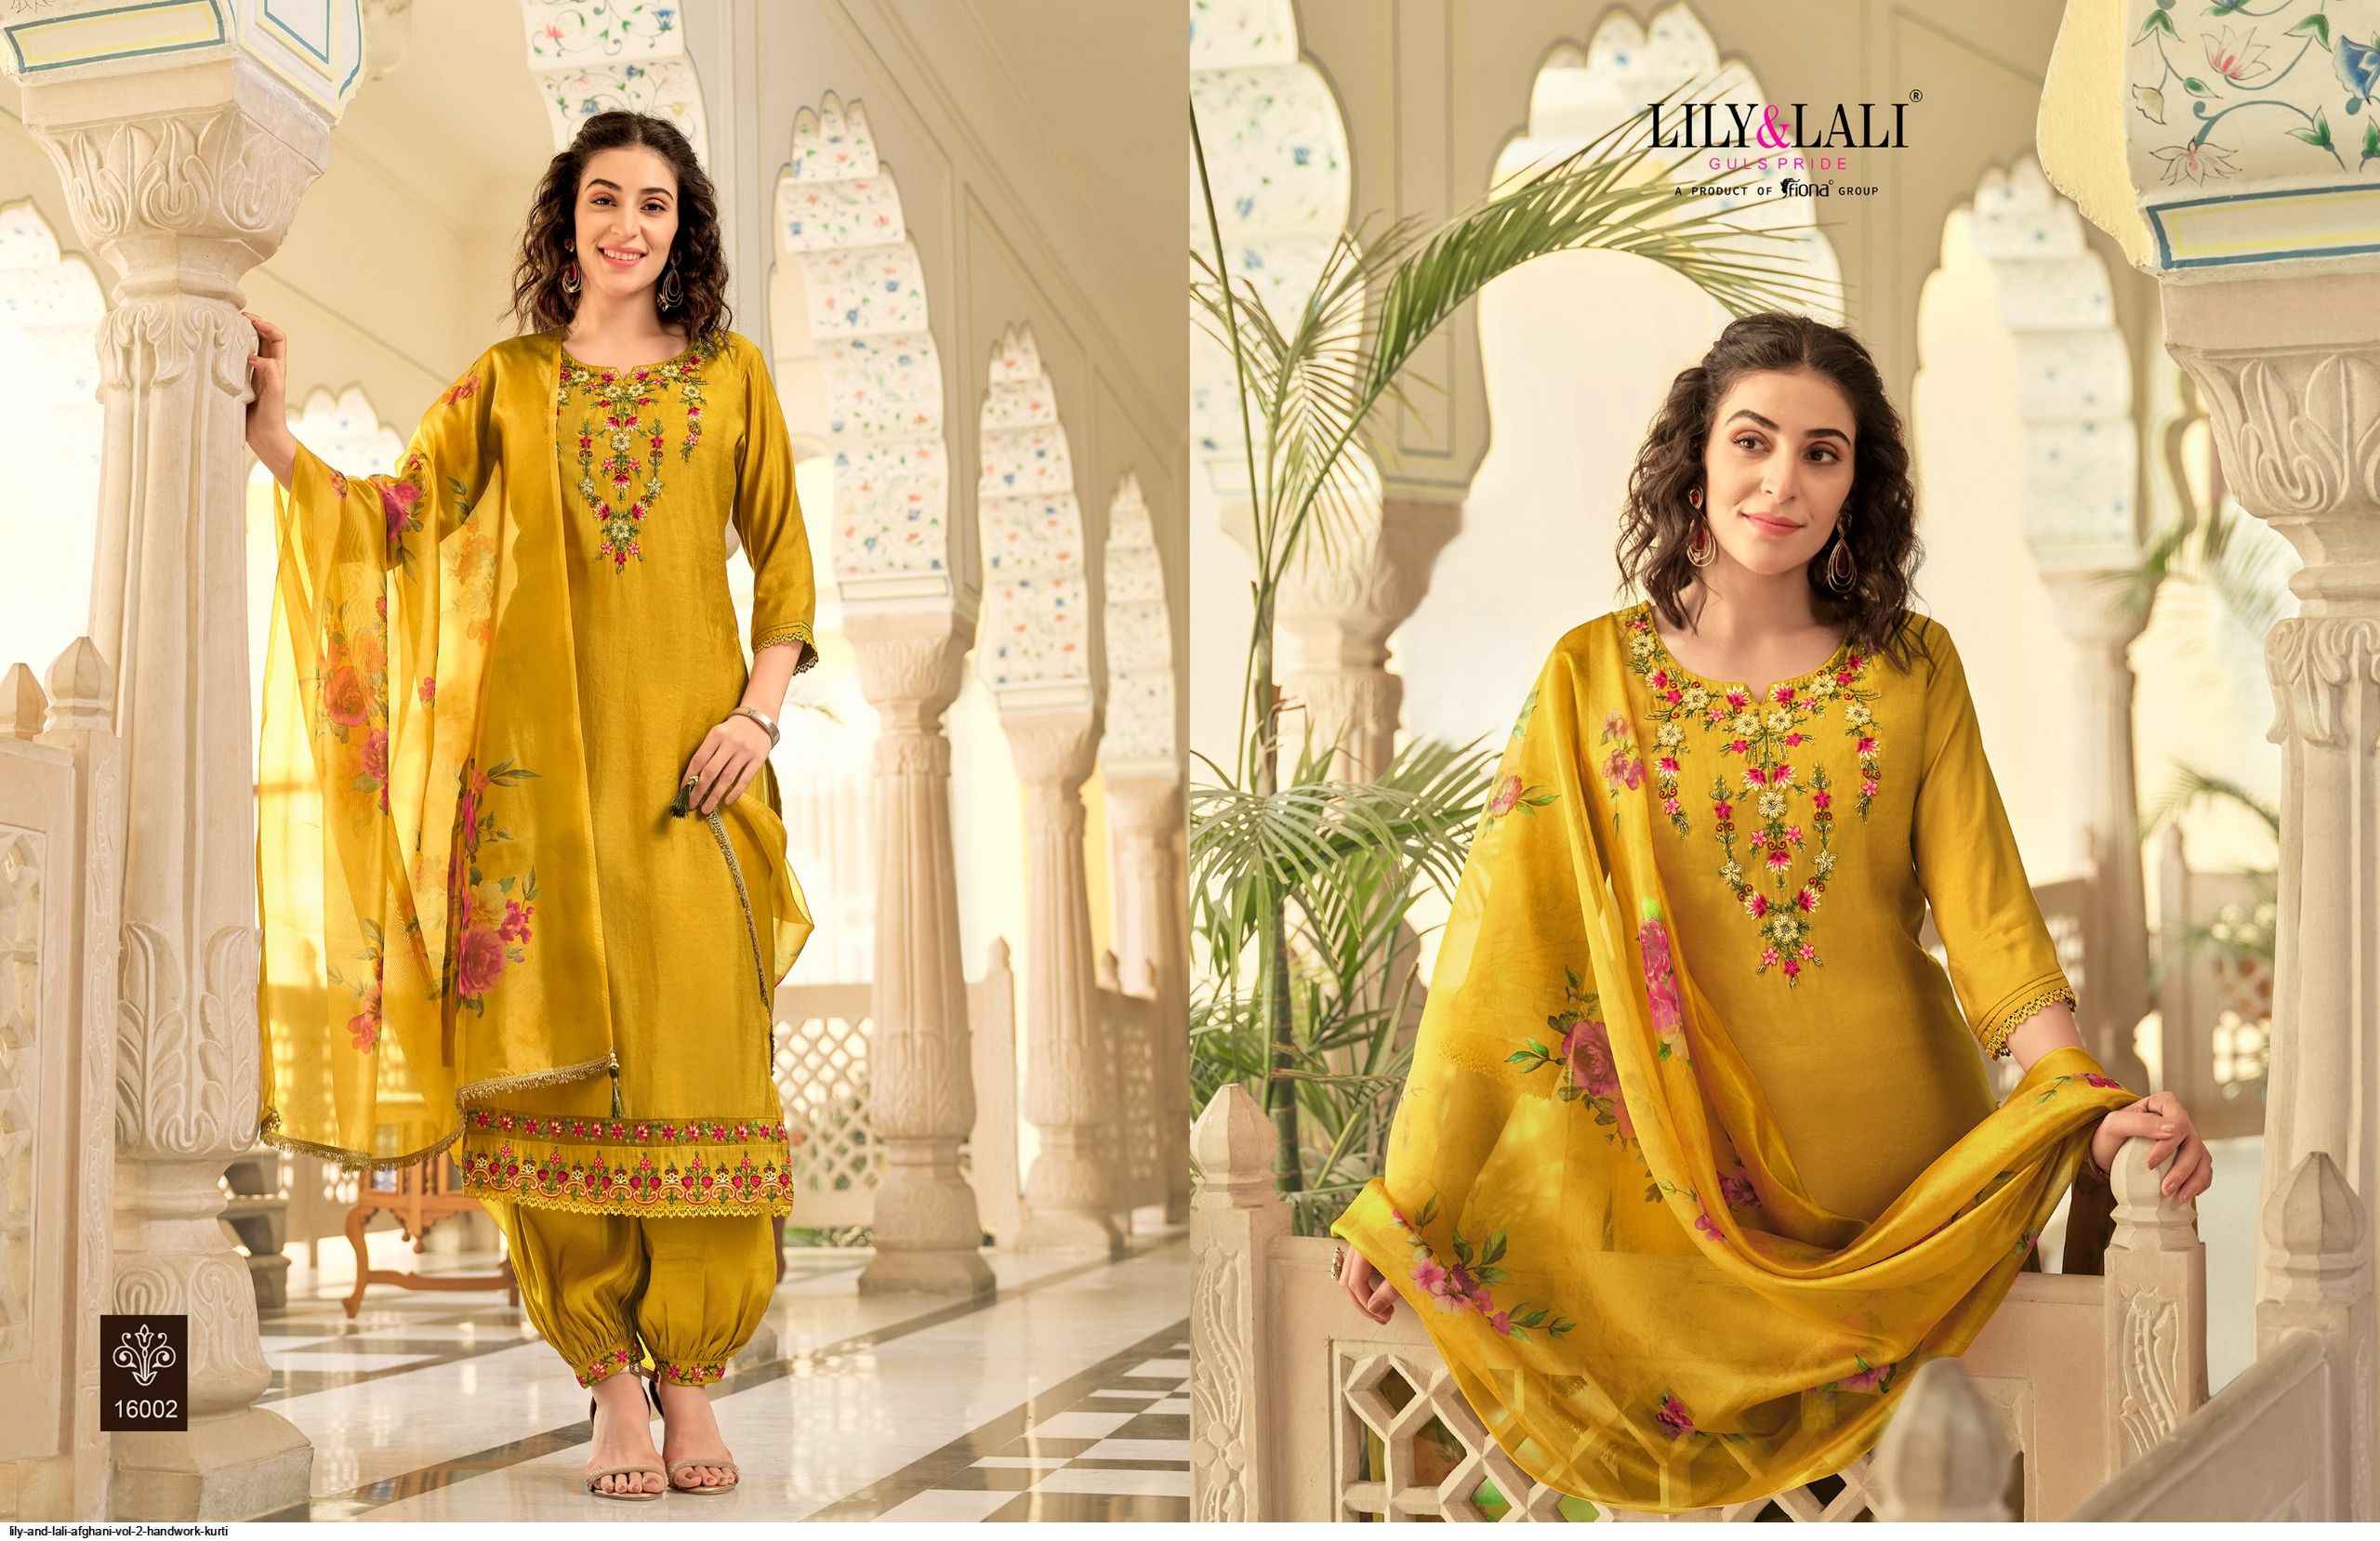 Lily And Lali Afghani Vol-2 Readymade Suit (6 Pc Catalog)